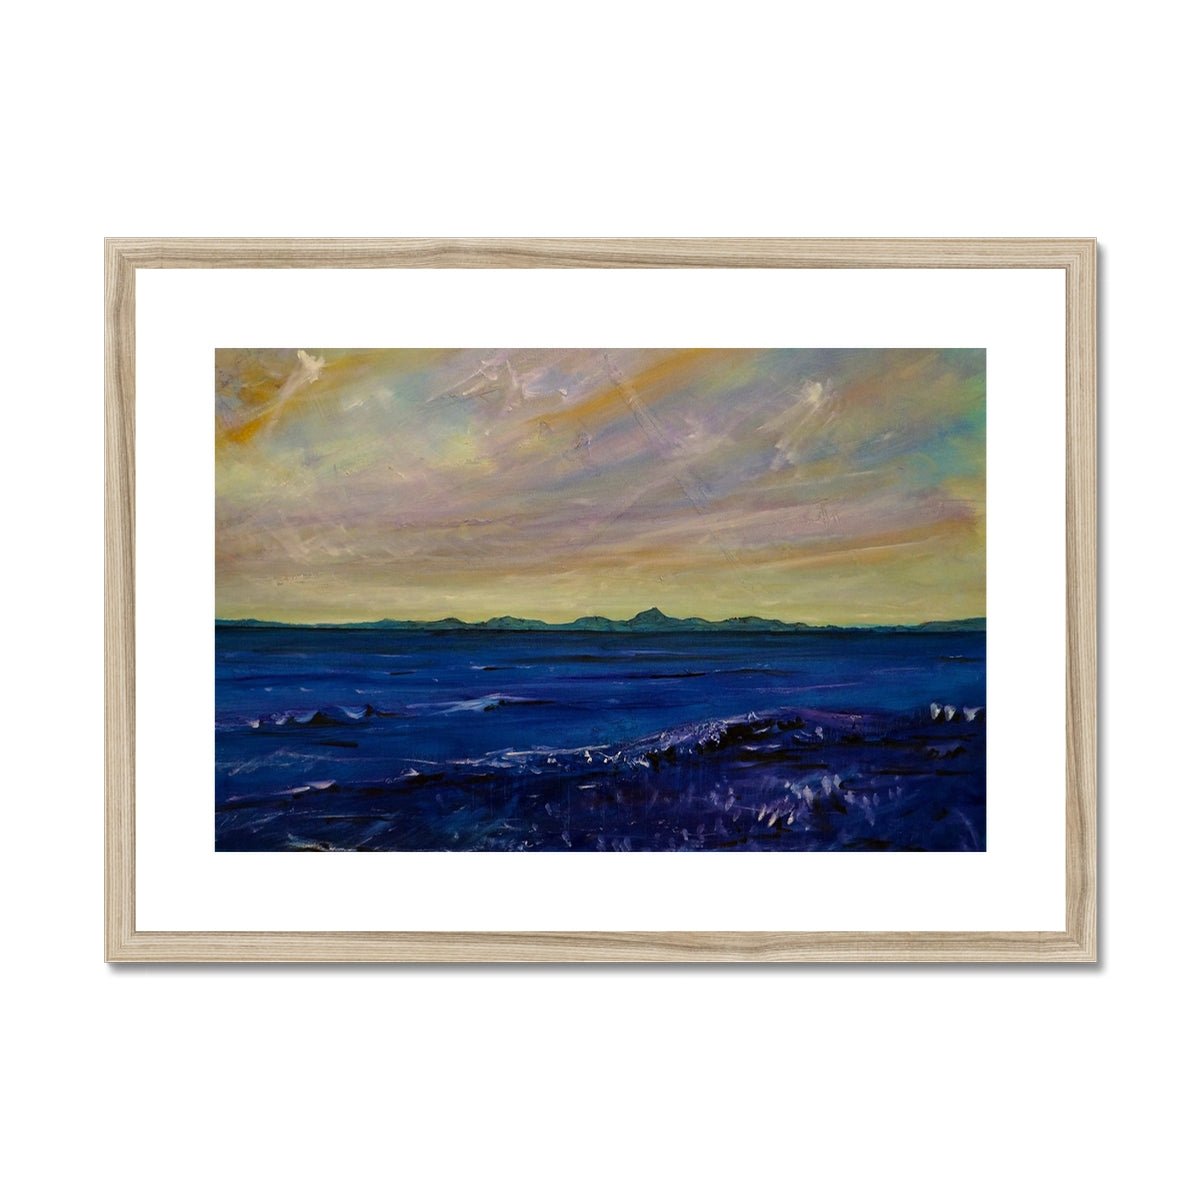 Jura Painting | Framed & Mounted Prints From Scotland-Framed & Mounted Prints-Hebridean Islands Art Gallery-A2 Landscape-Natural Frame-Paintings, Prints, Homeware, Art Gifts From Scotland By Scottish Artist Kevin Hunter